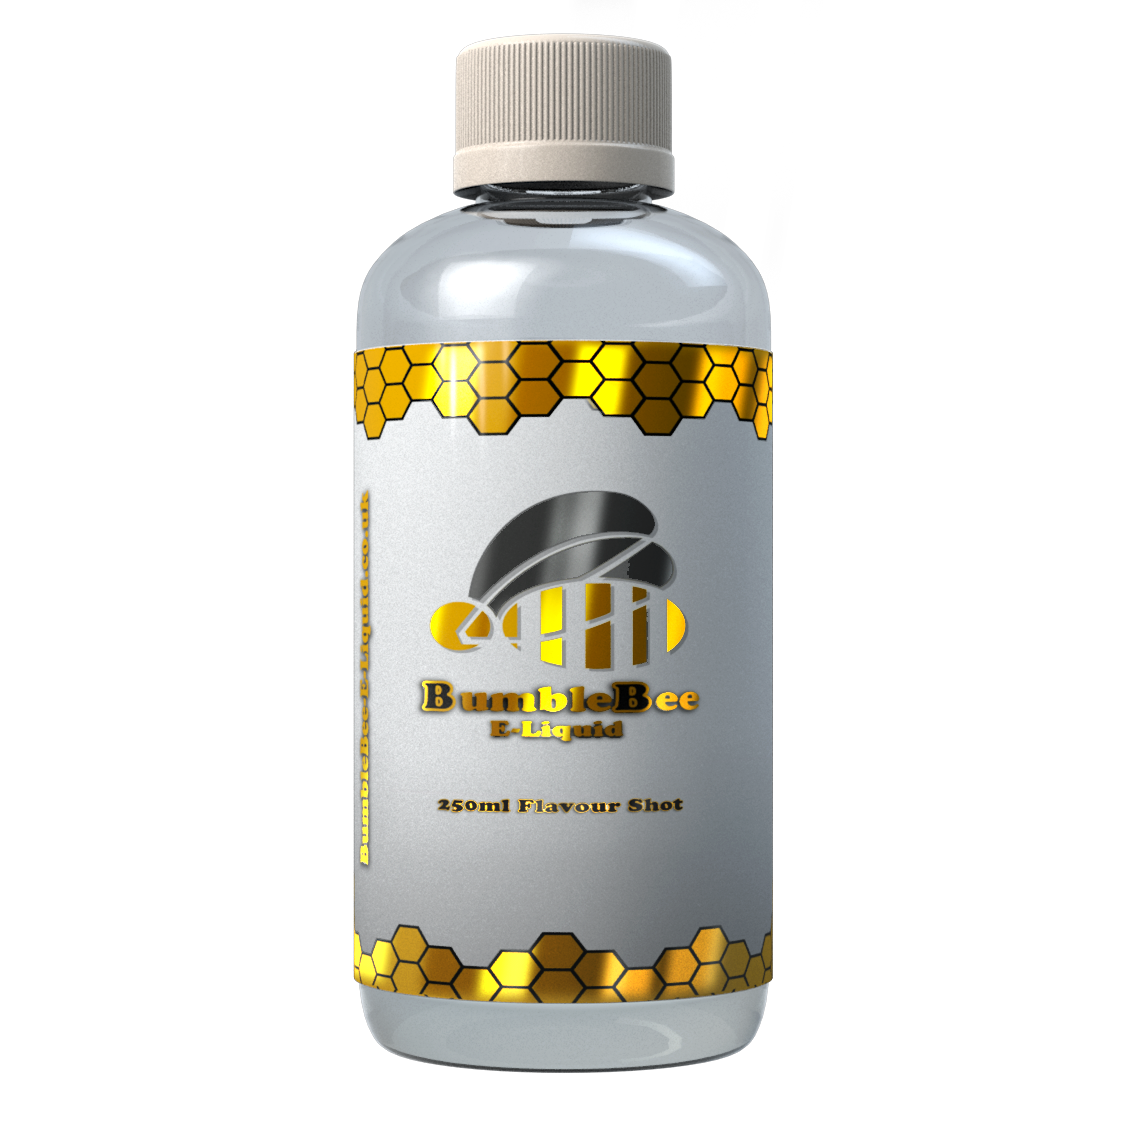 Lemon Refresher Flavour Shot by Bumblebee - 250ml